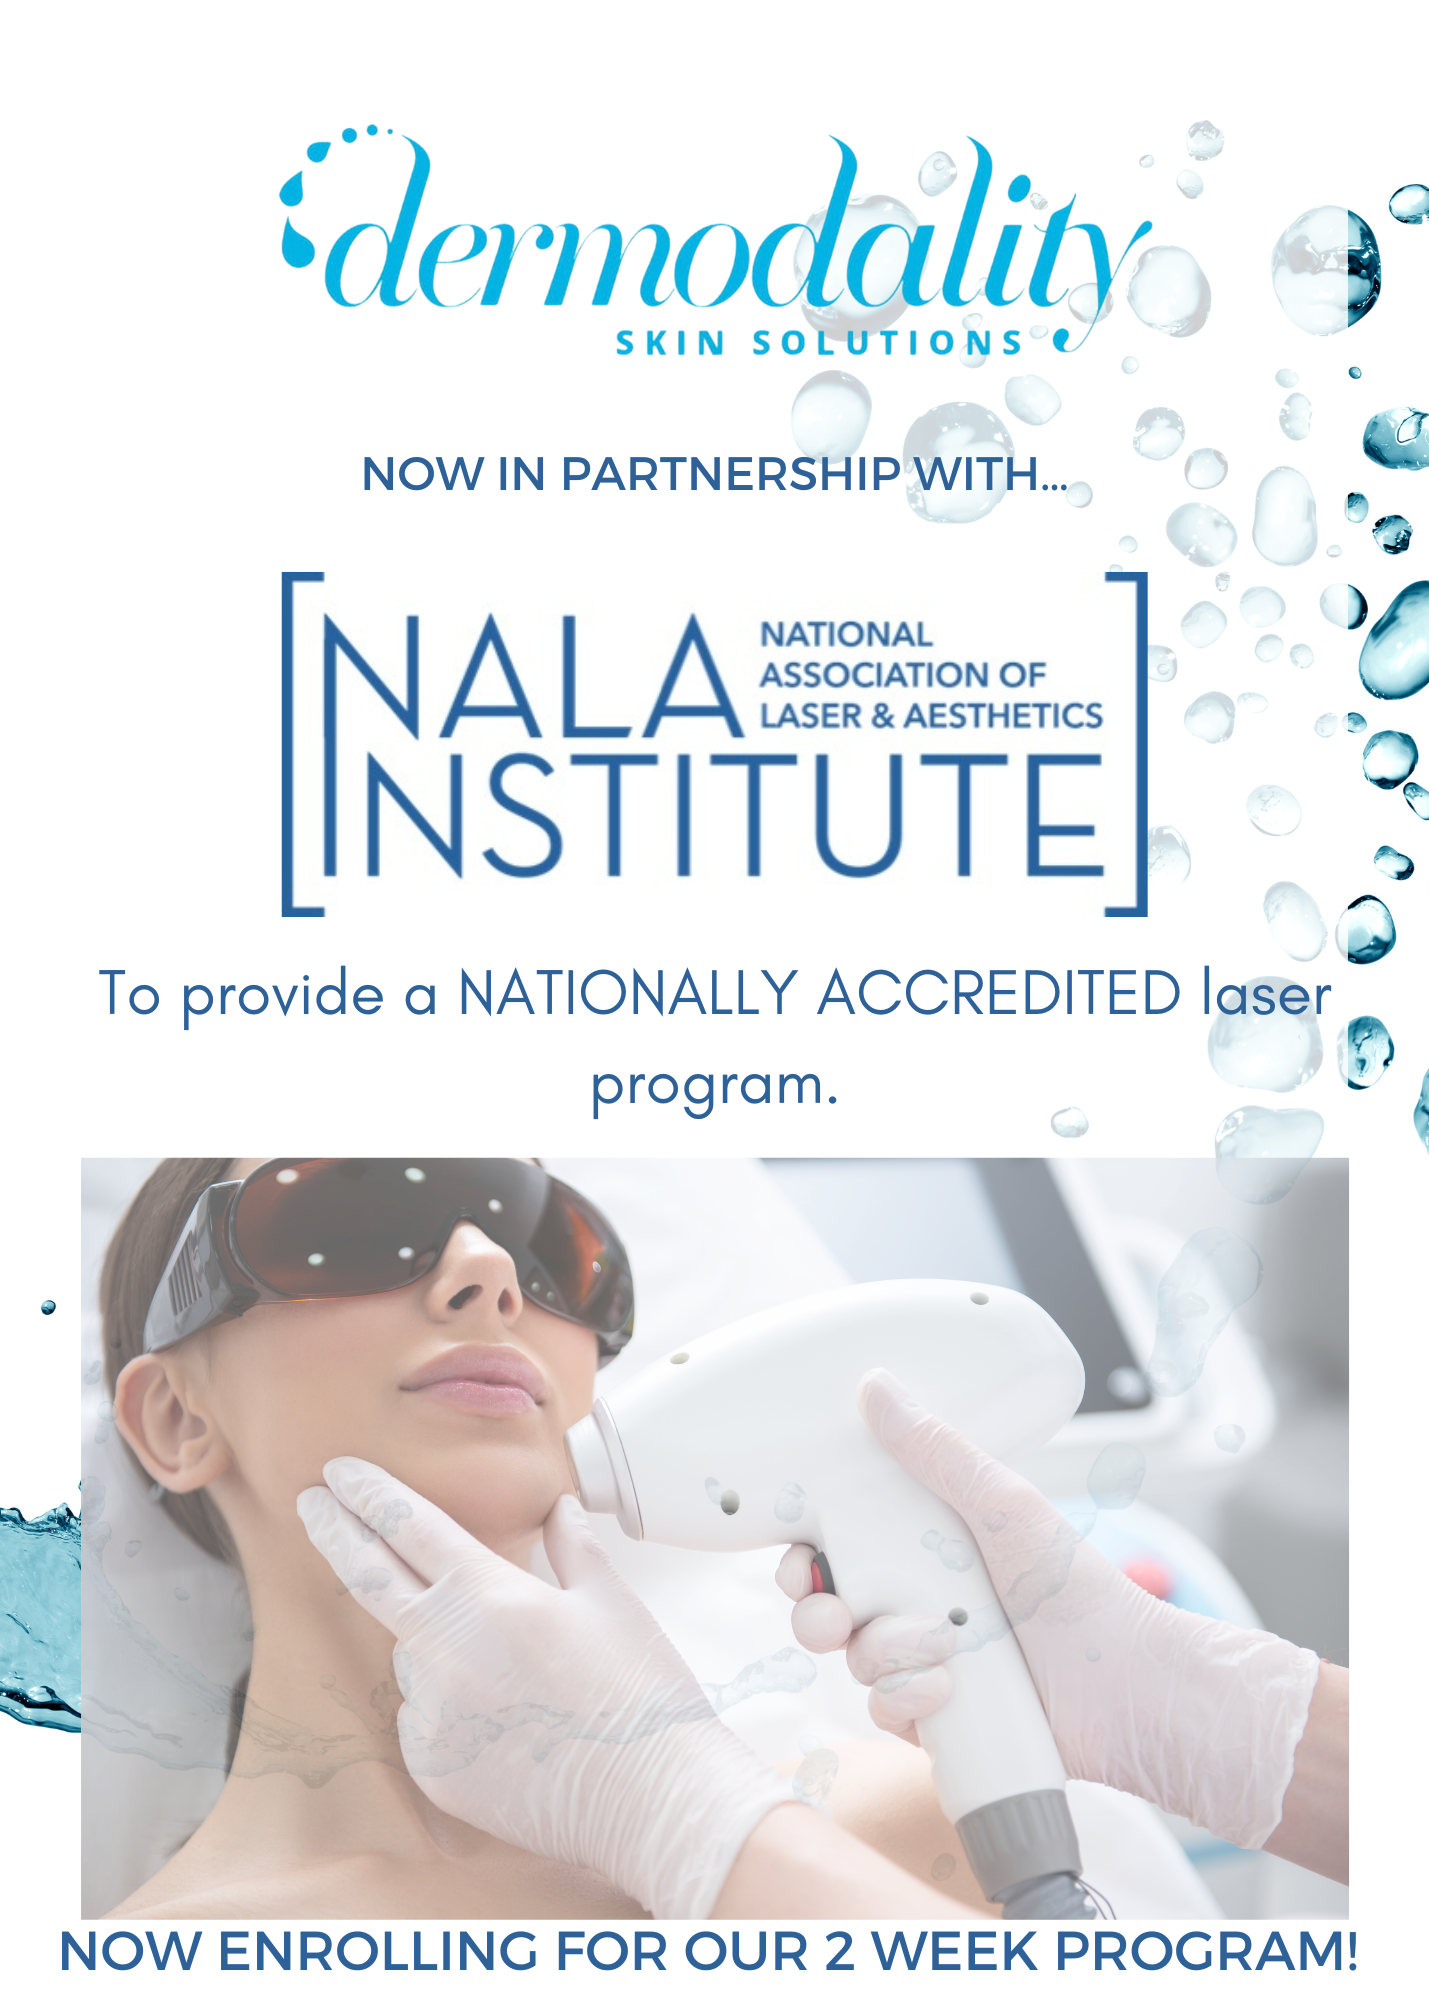 Dermodality Skin Solutions - partnering with NALA institute